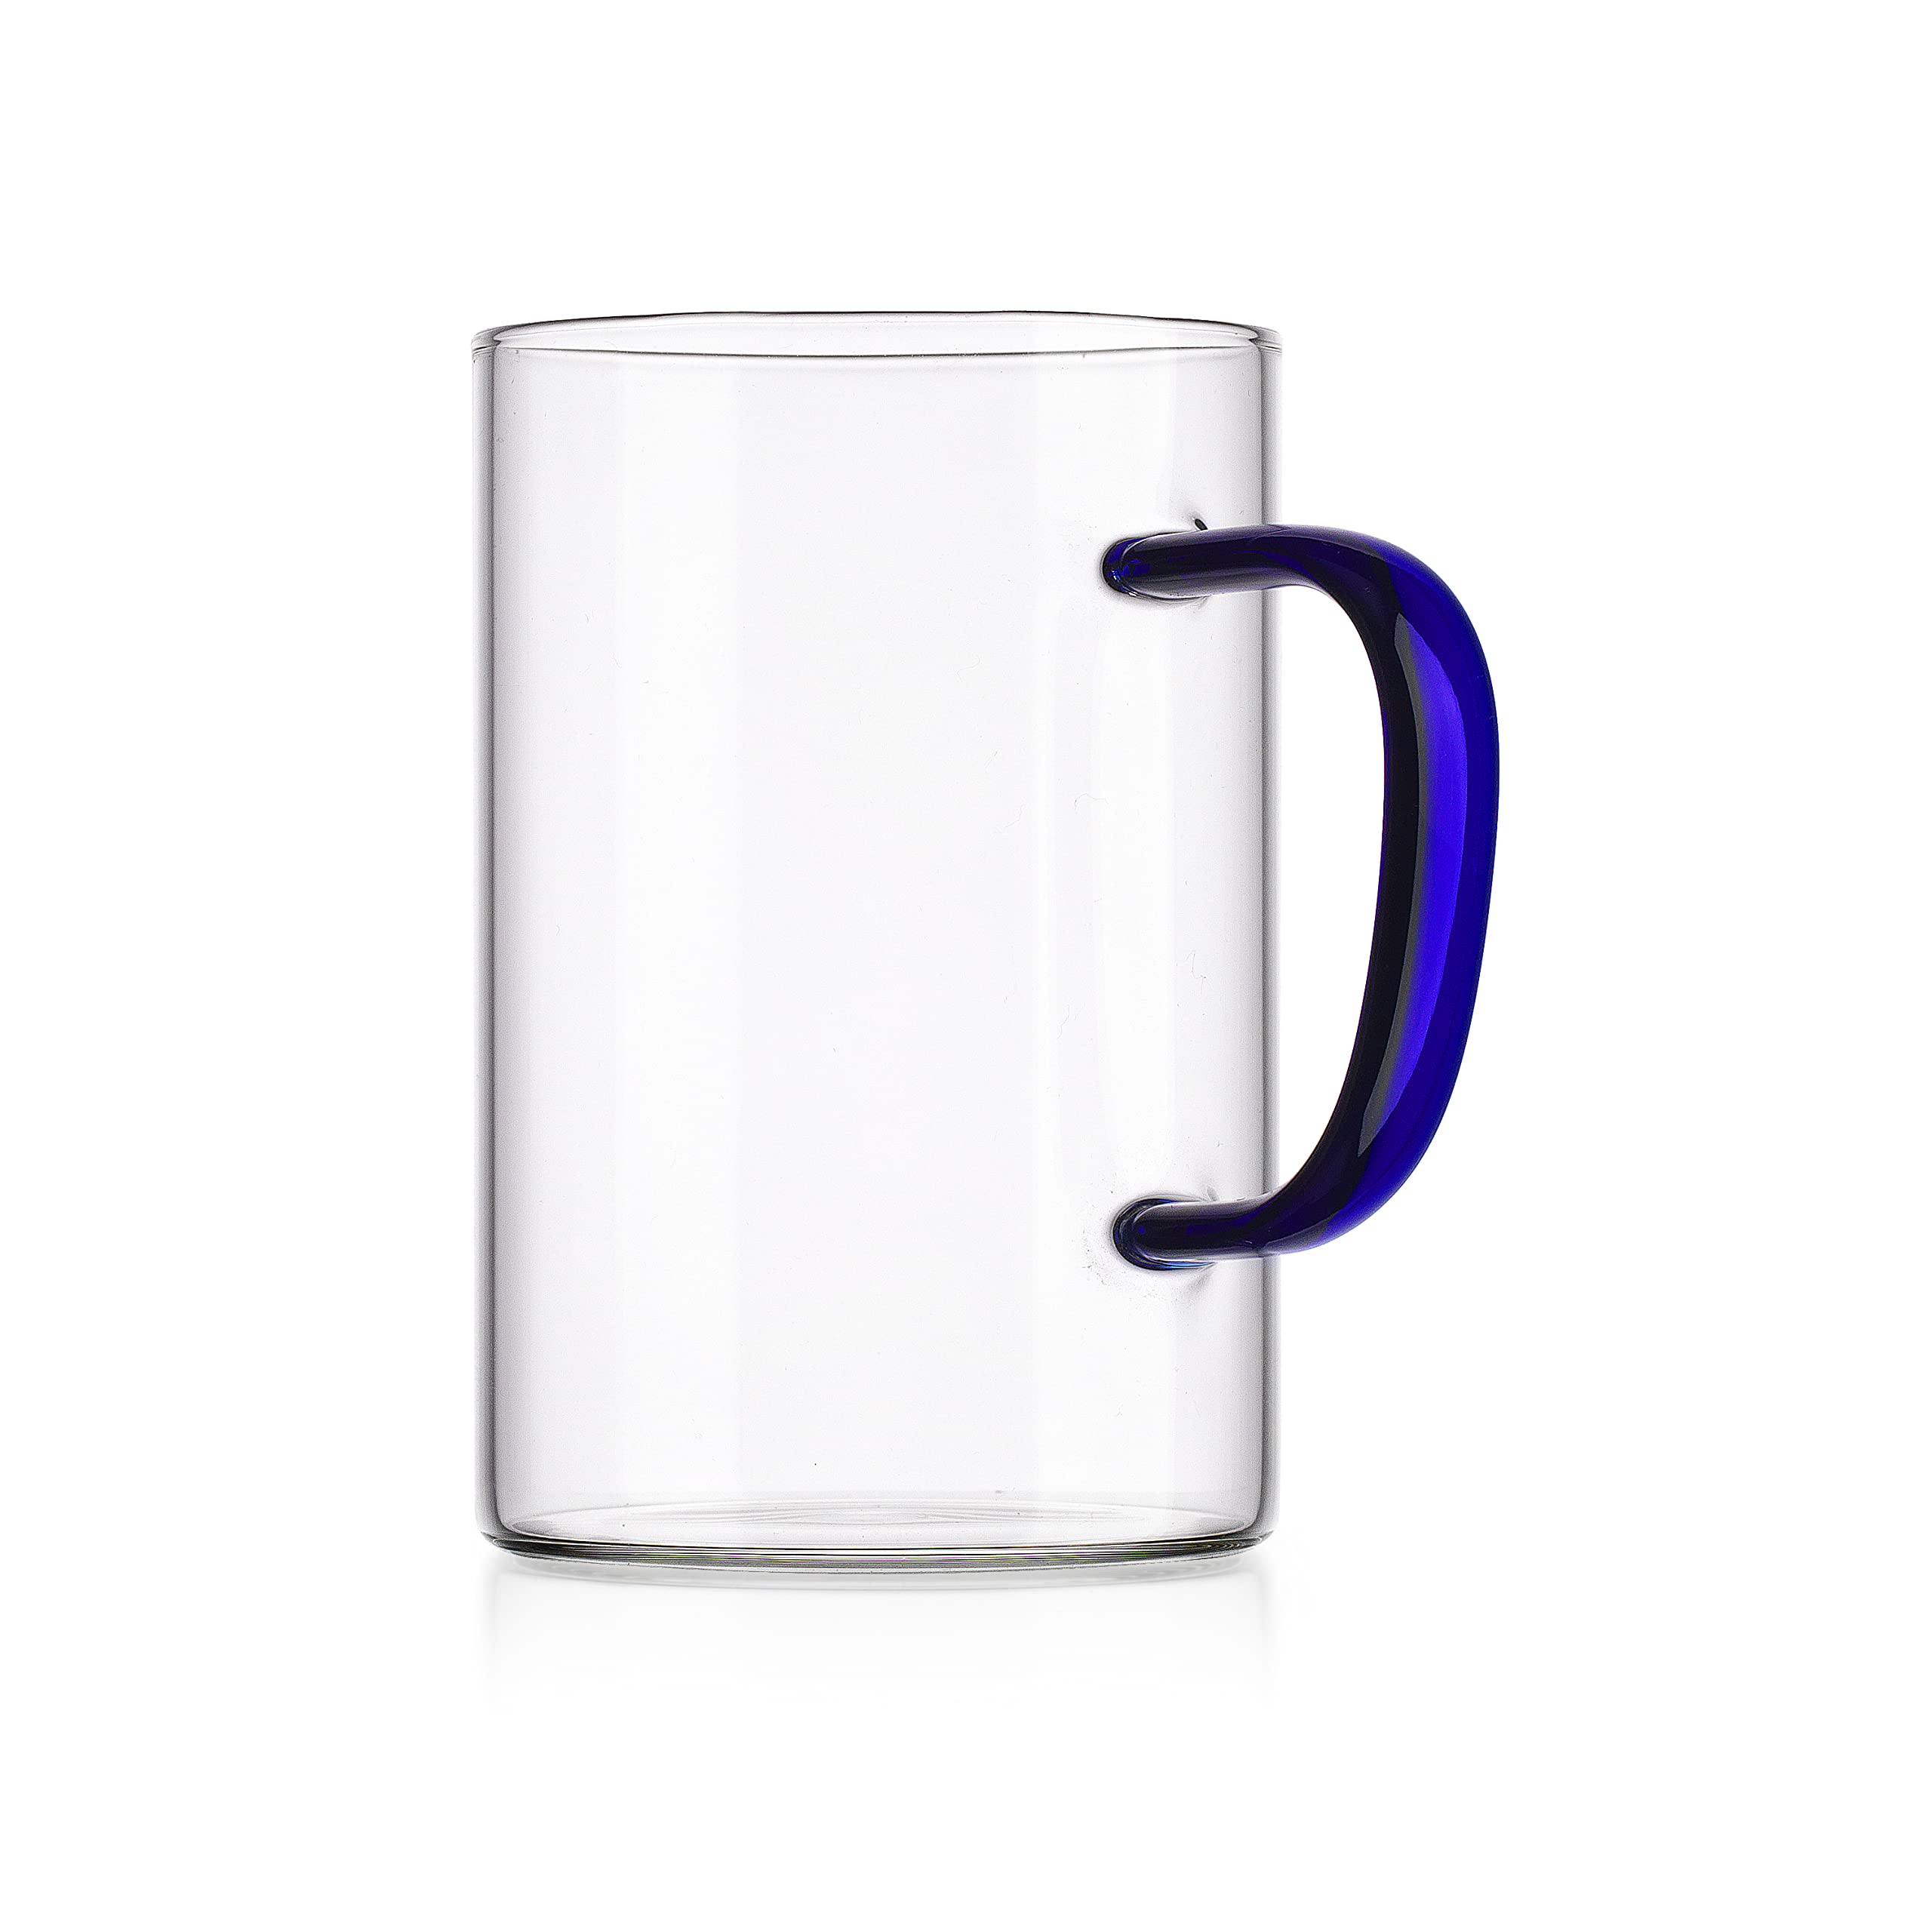 Glaver's Set of 2 Classic Coffee Mugs – Cups With Blue Colored Handles for Espresso, Tea – 17 Oz Coffee Mugs –Ideal for Any Modern Kitchen, Bar, Pub, Dishwasher safe